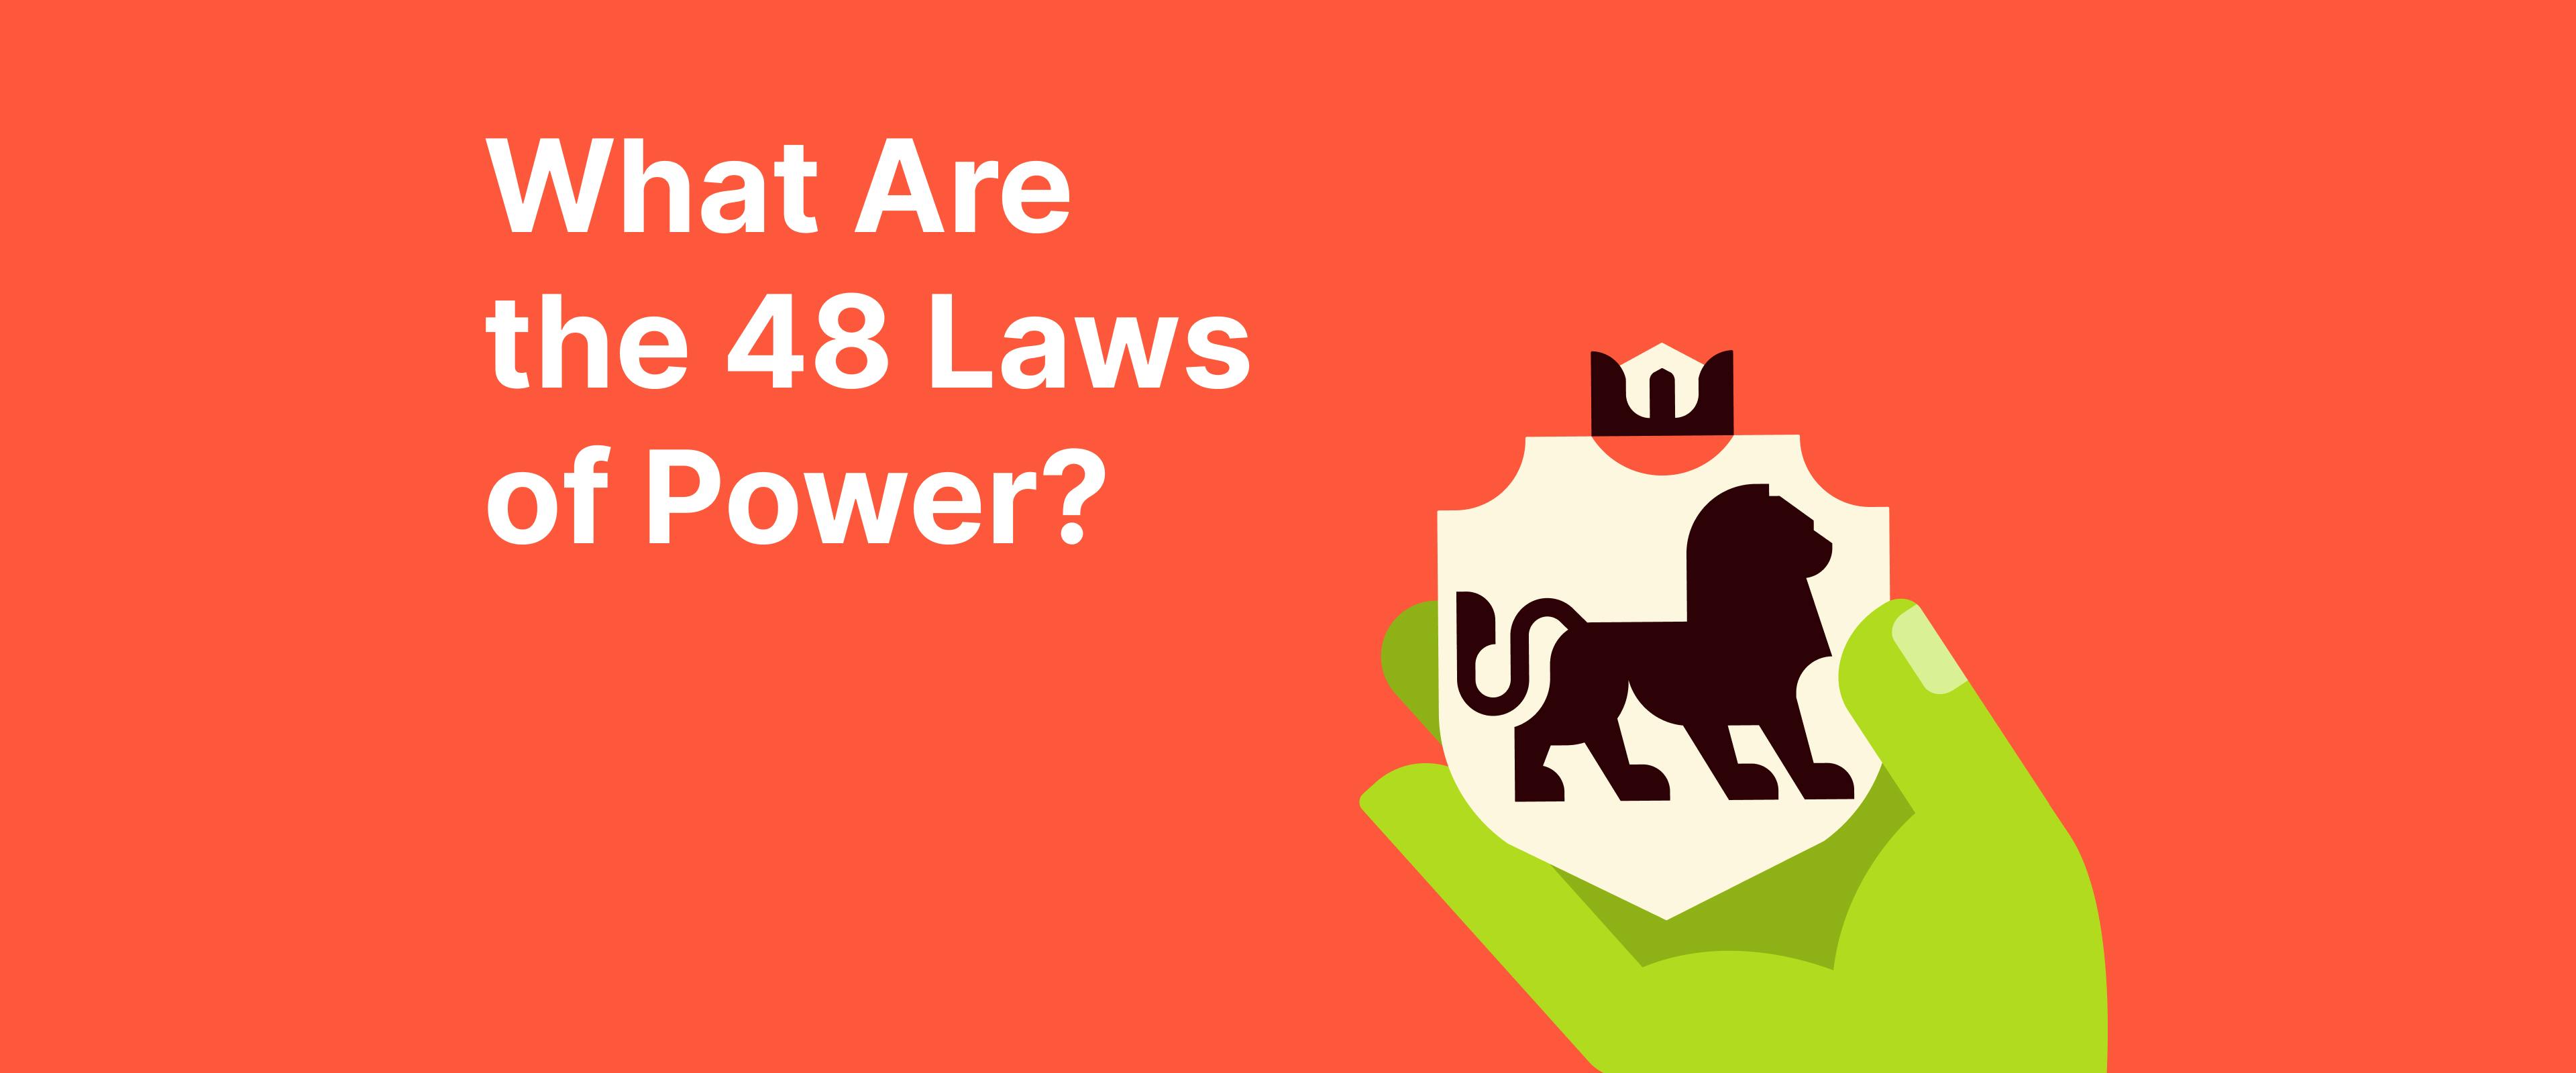 48 Laws of Power | Poster